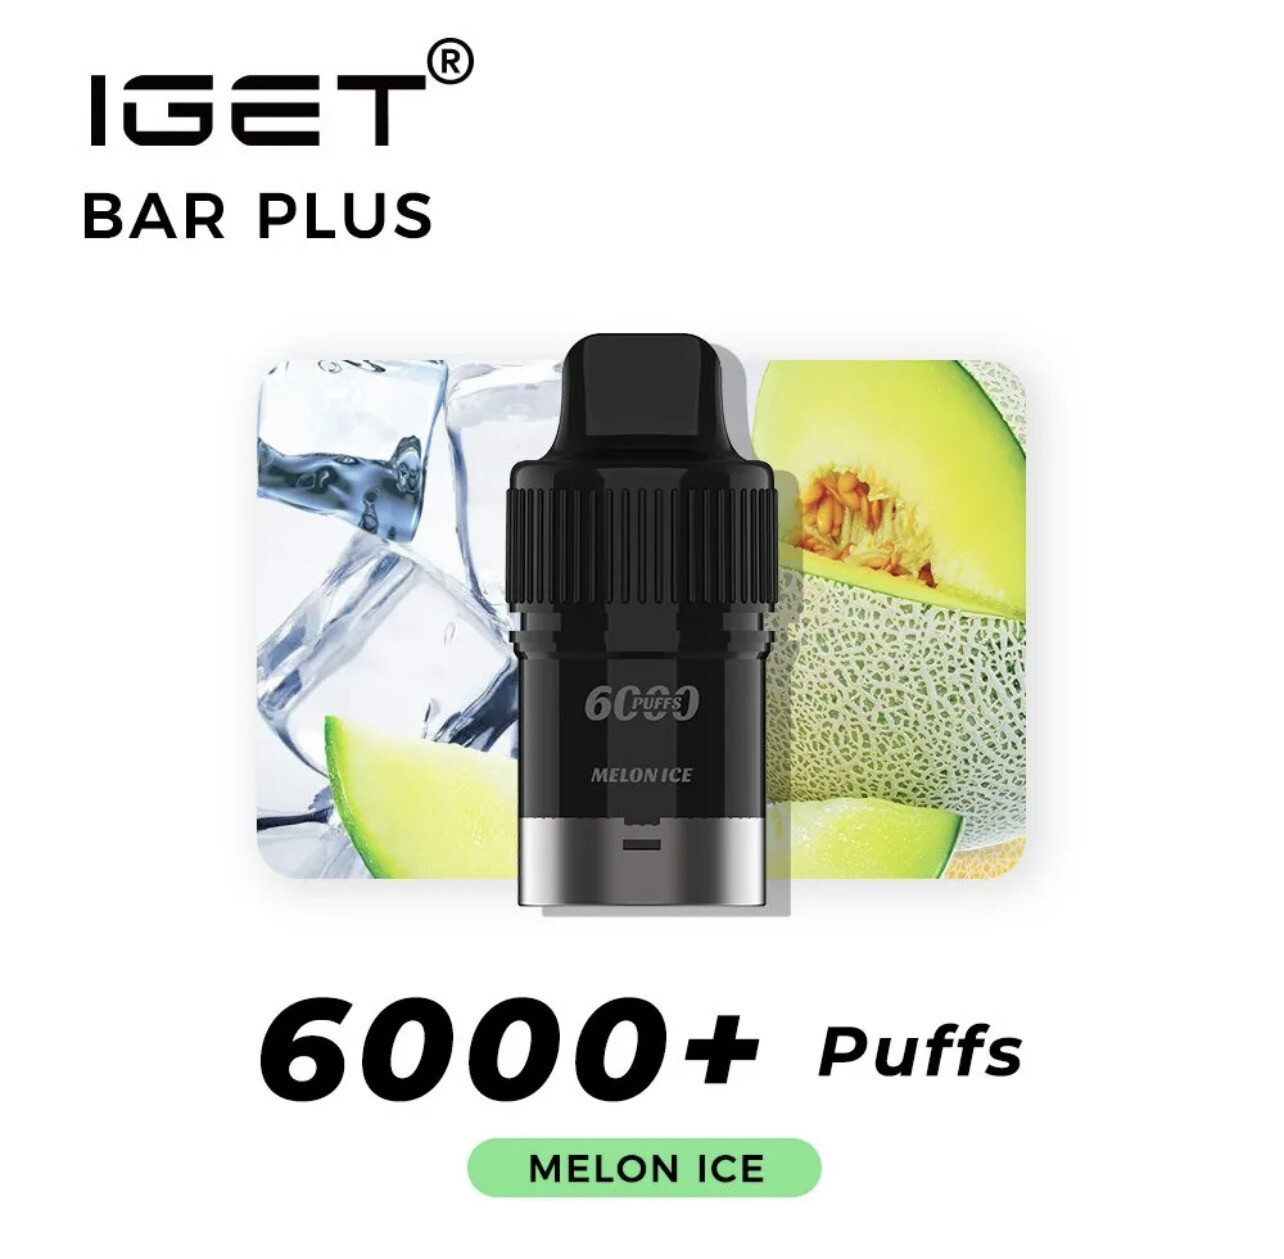 MELON ICE ICE PODS ONLY 6000 PUFFS